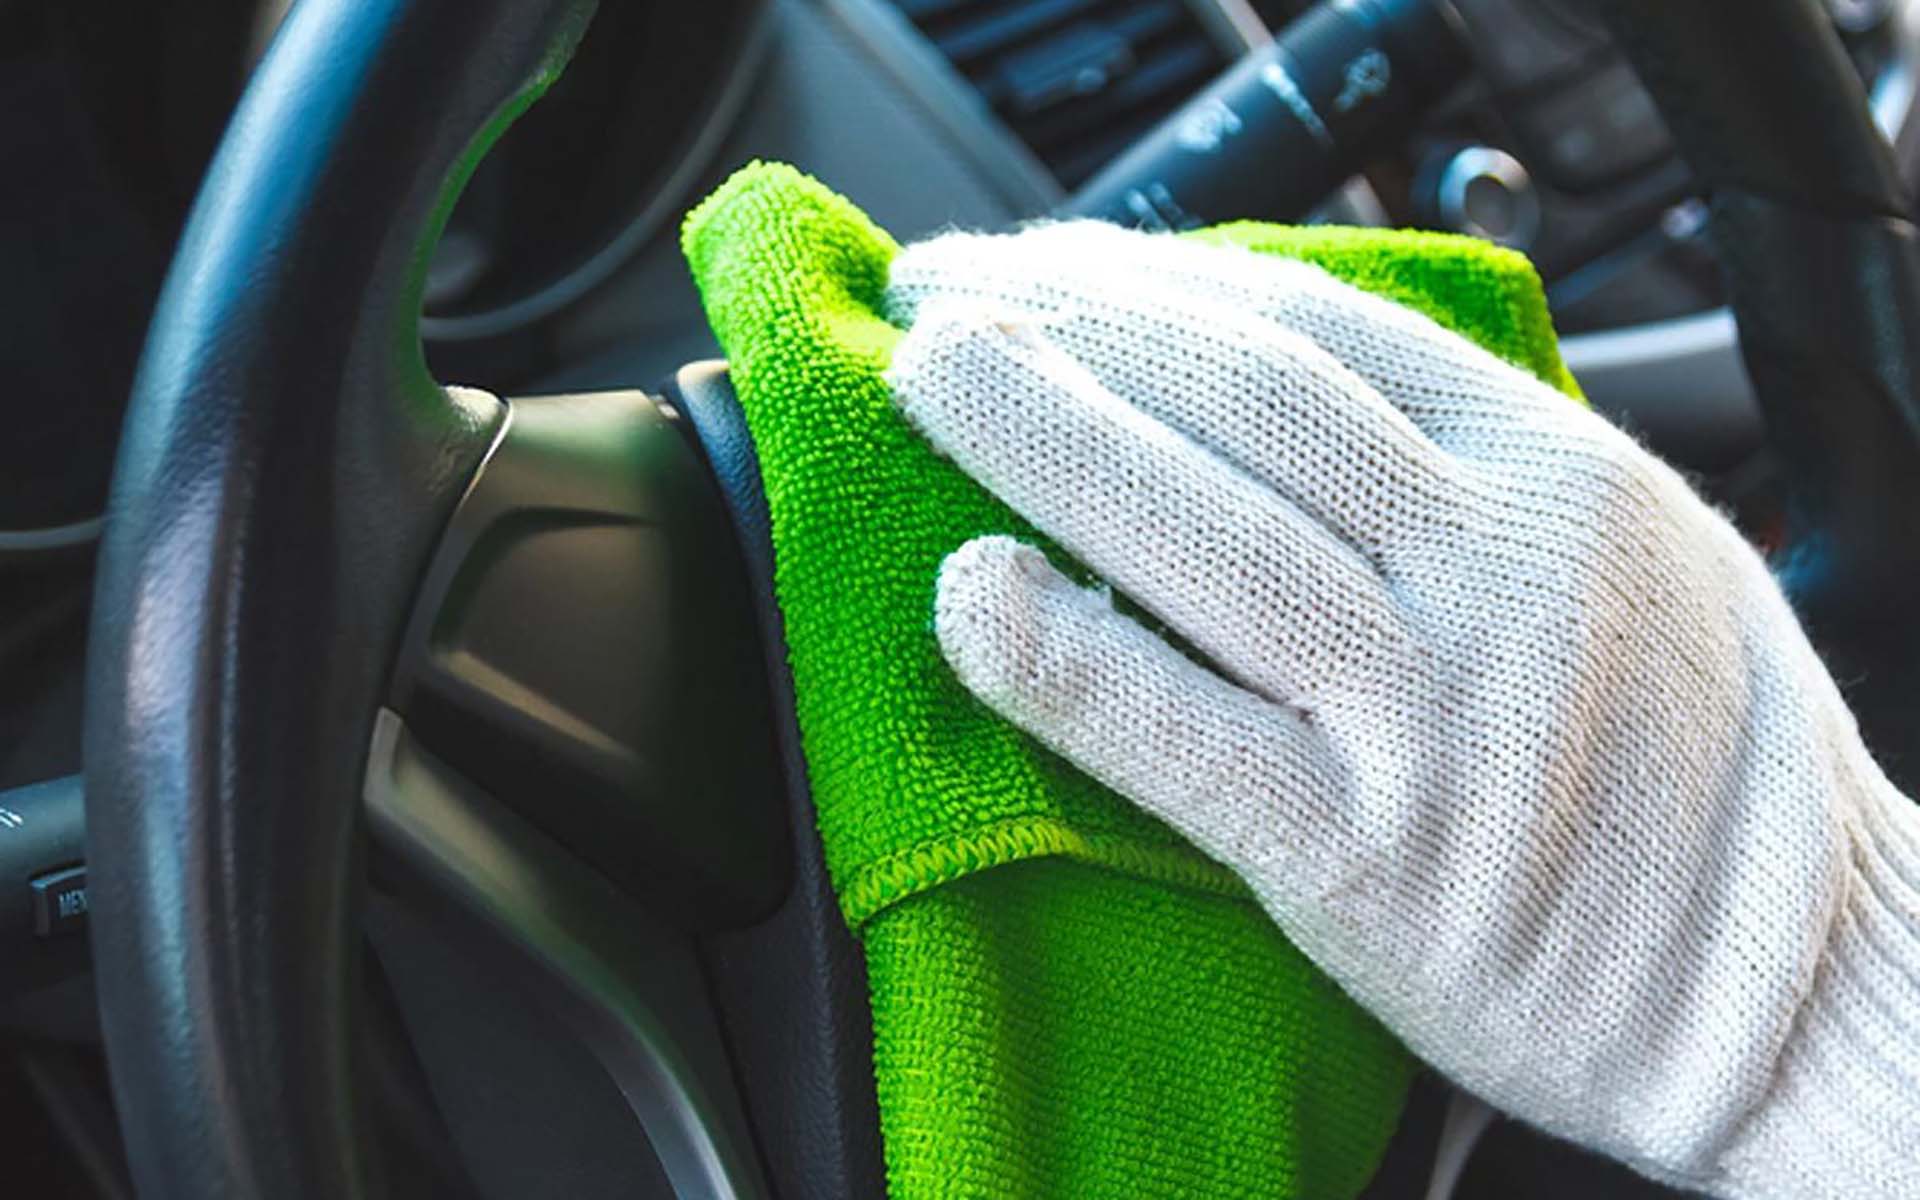 10 car cleaning tips from the pros